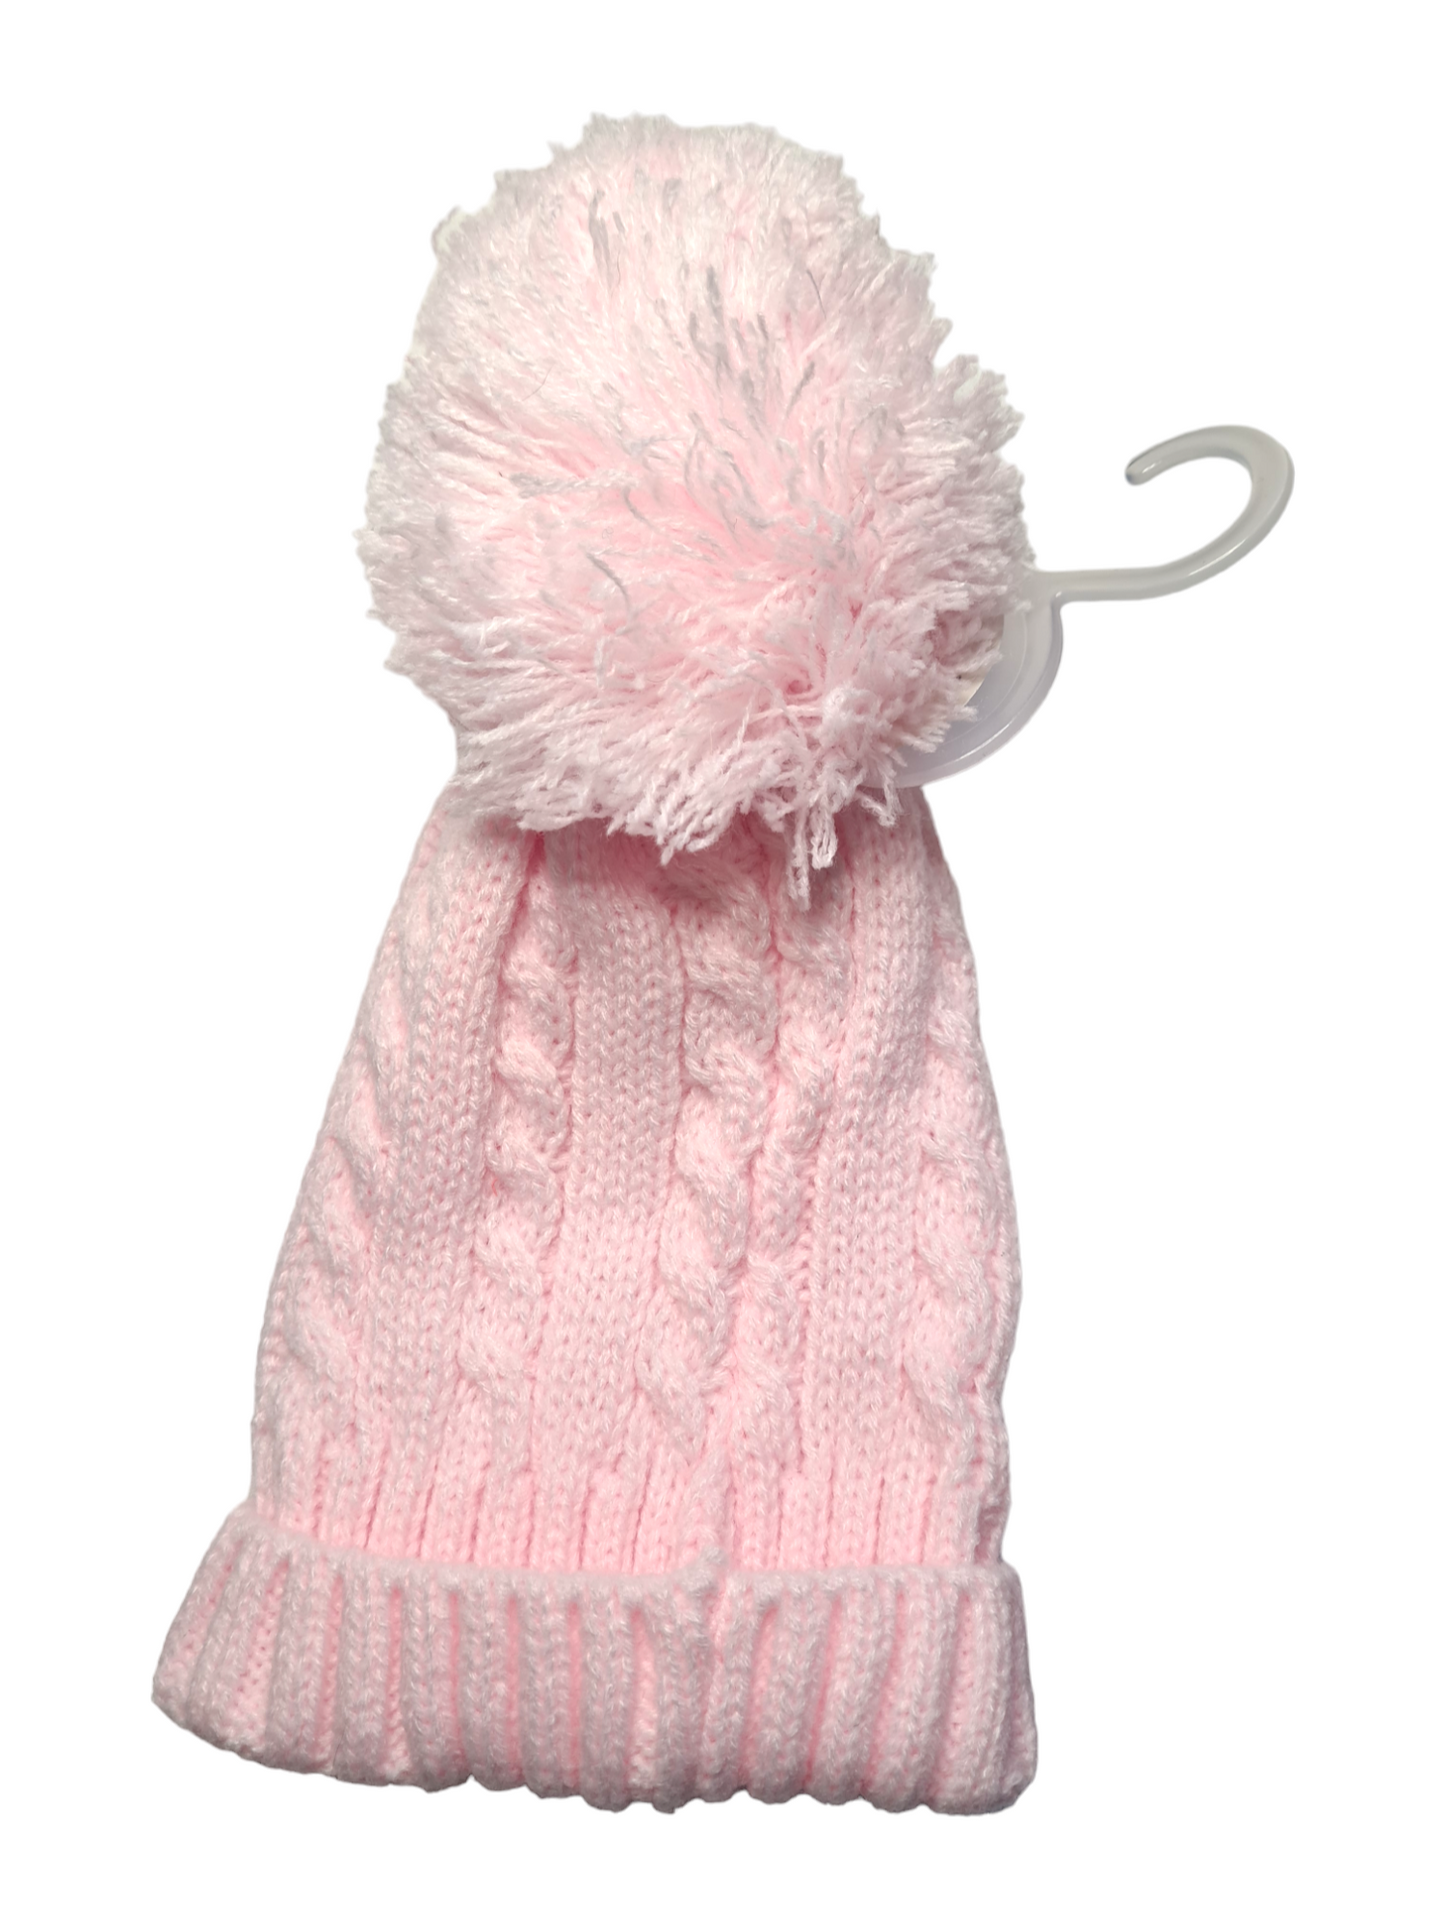 Kids Knitted Hats - Mylookmyway